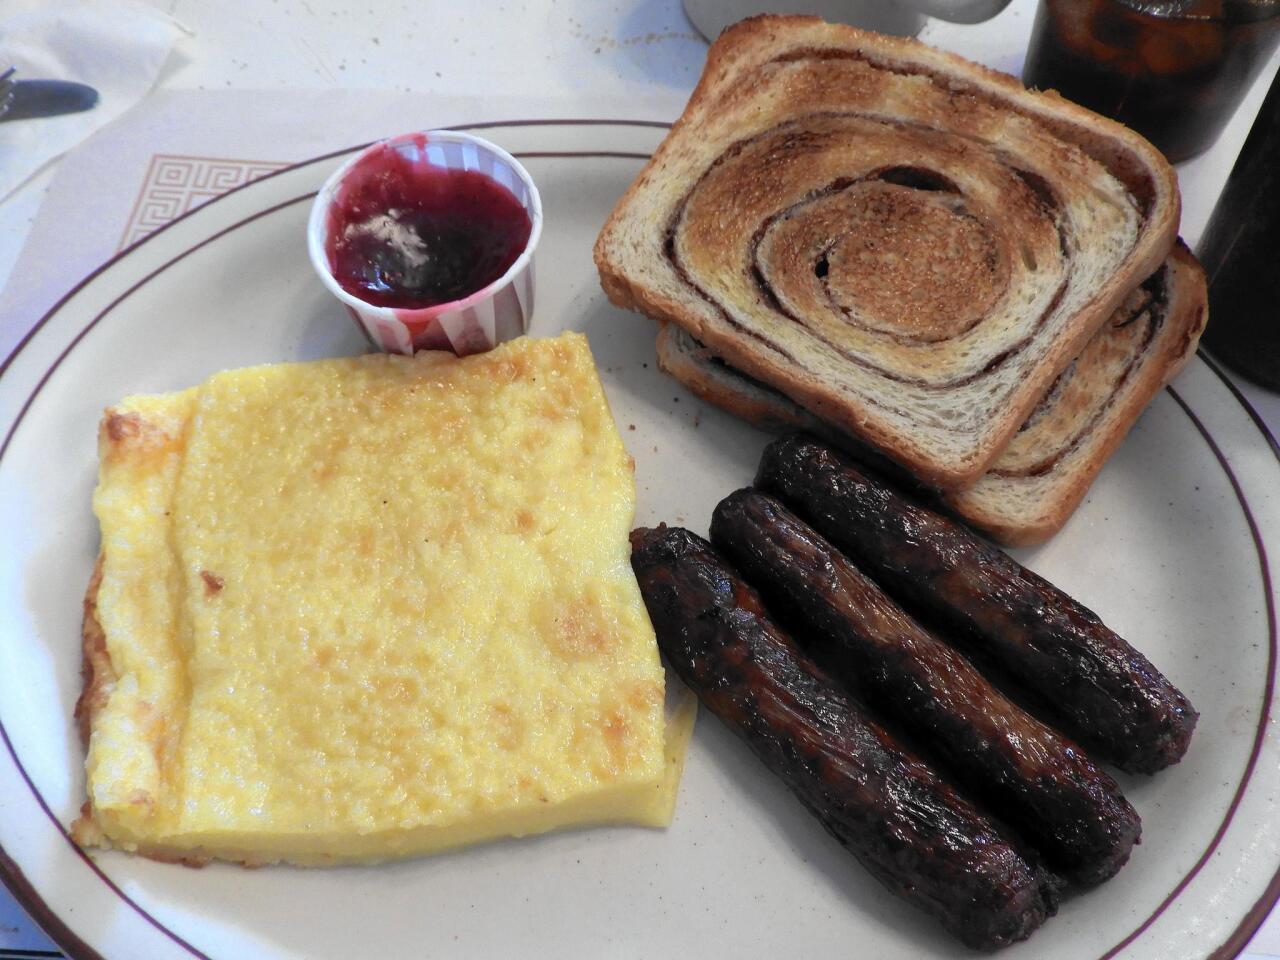 A pancake called pannukakku and a toasted bread called nisu are among the Finnish foods served at breakfast time at Suomi Home Bakery & Restaurant in Houghton, Mich.